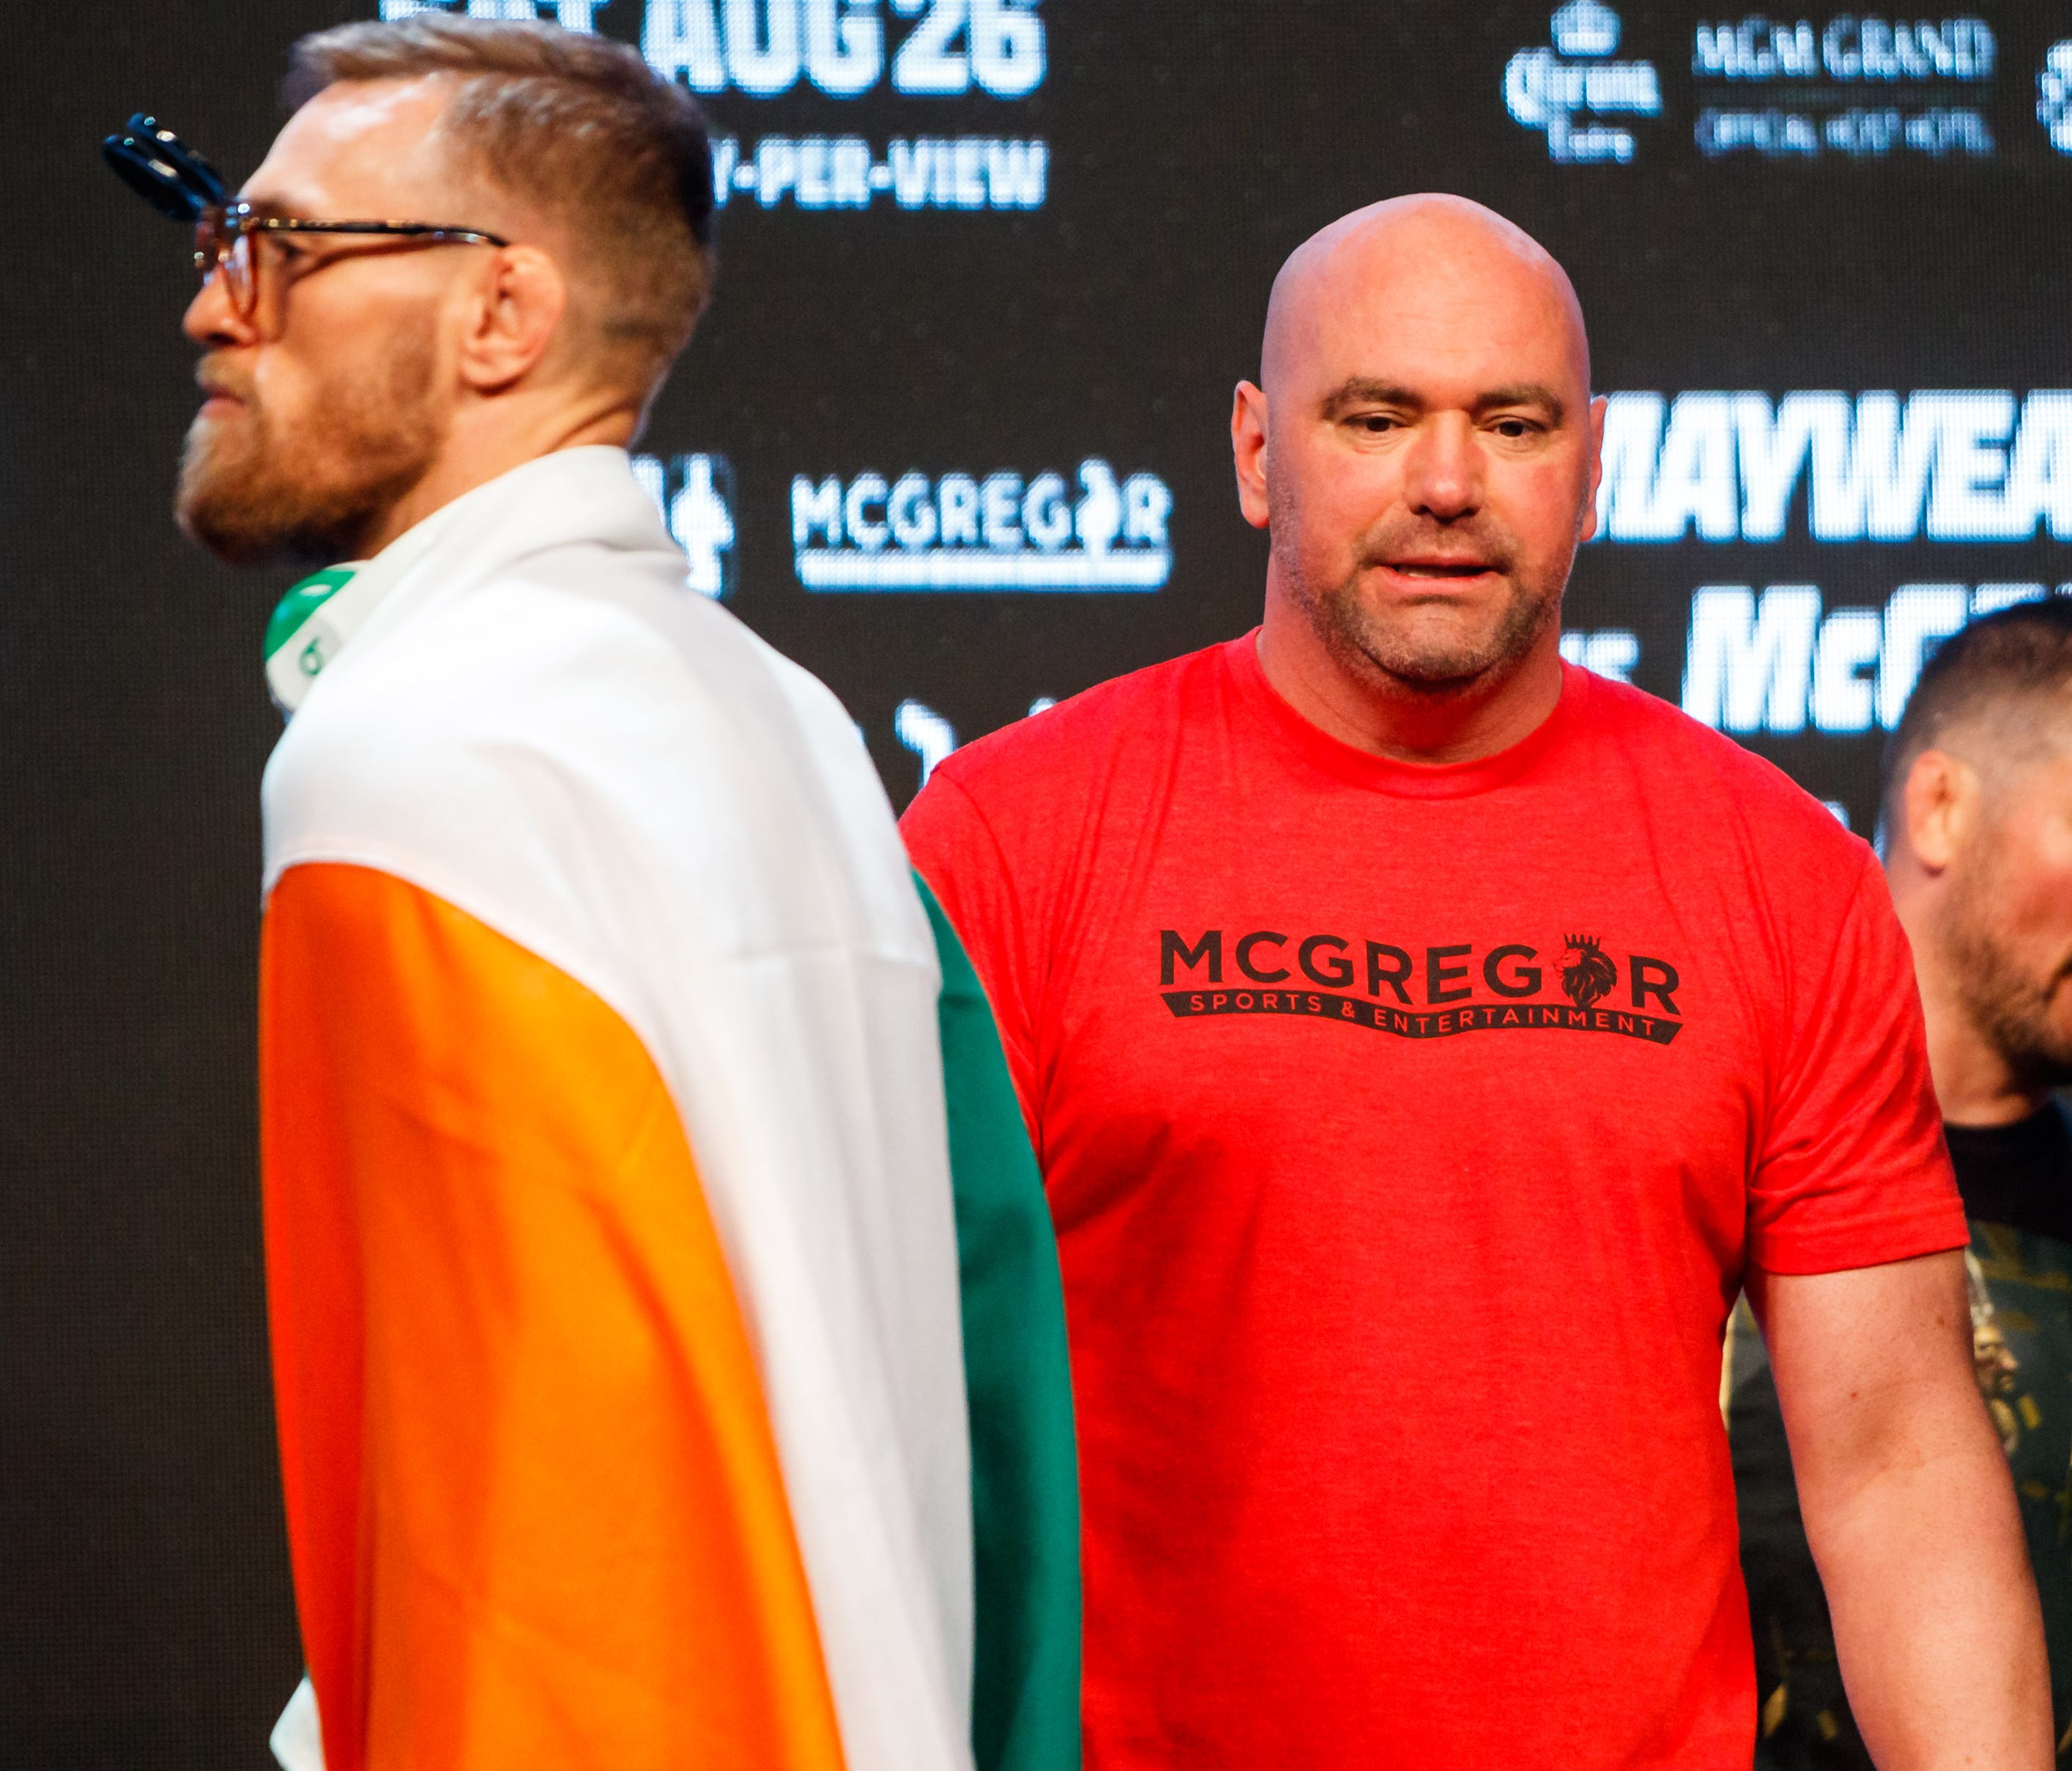 Conor McGregor (left) and UFC President Dana White during weigh-ins on Friday.